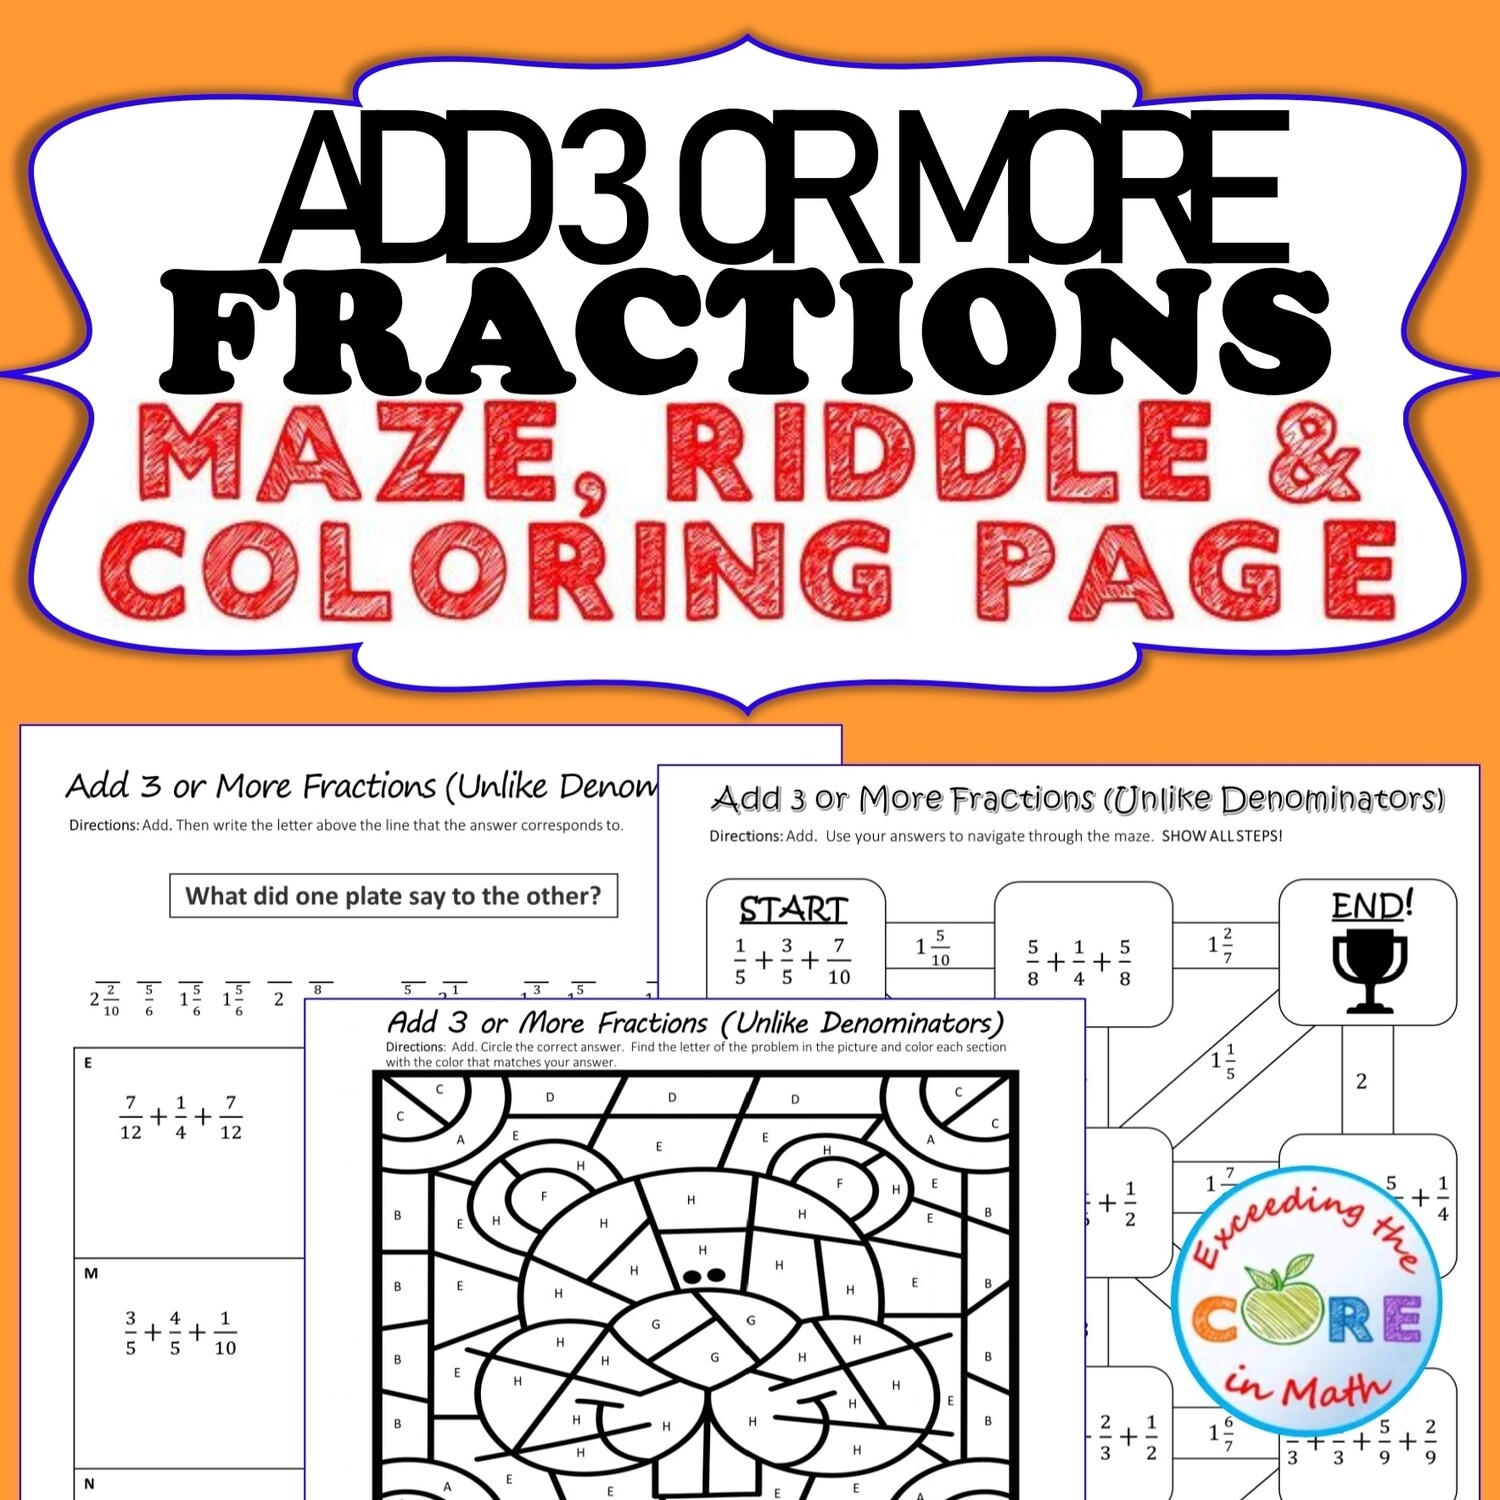 ADD 3 OR MORE FRACTIONS Maze, Riddle, Coloring Page